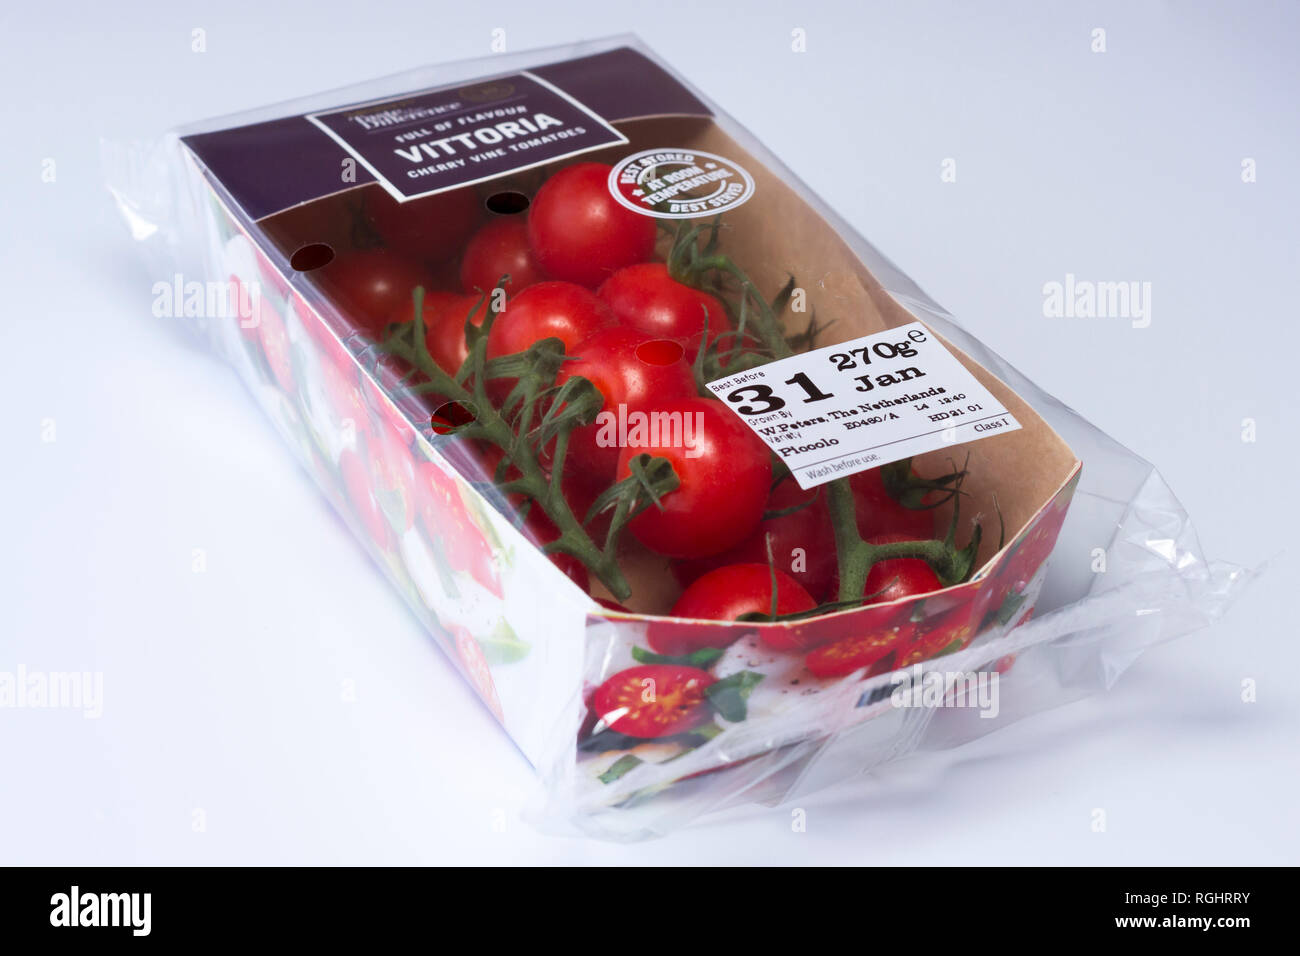 Vittoria cherry vine tomatoes in packaging. Grown in the EU. 2019 Stock Photo